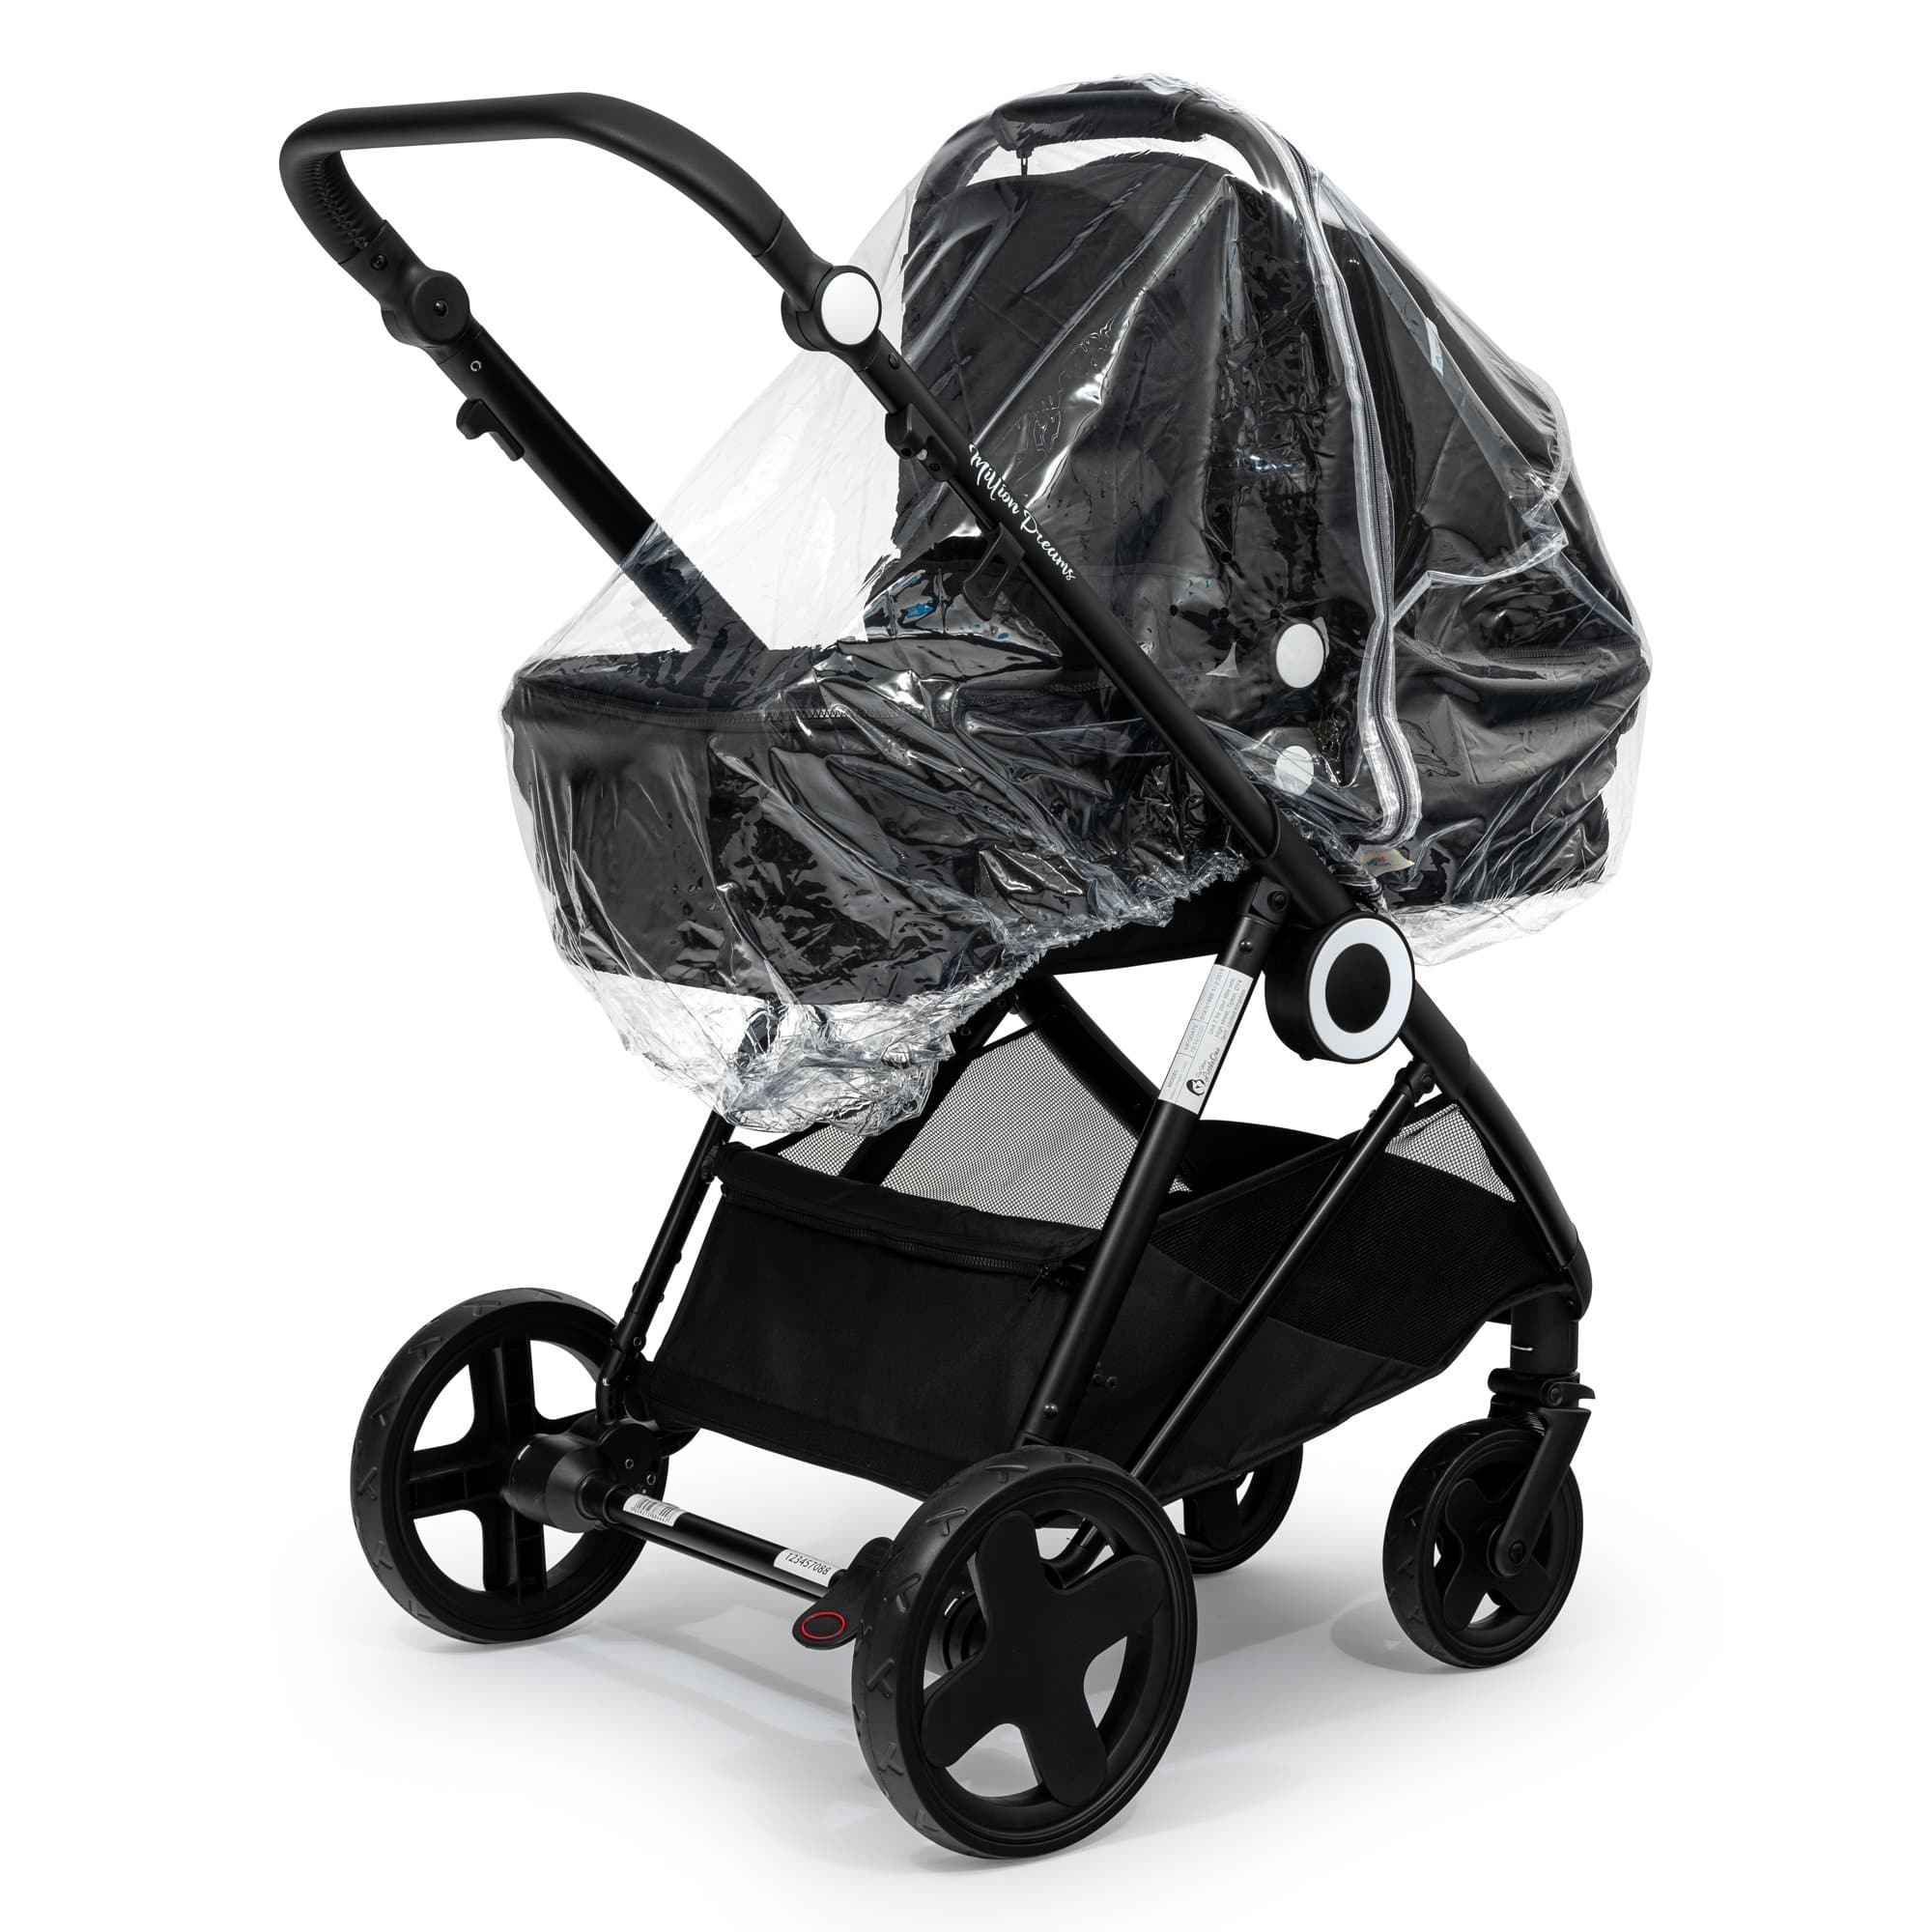 2 in 1 Rain Cover Compatible with Babylo - Fits All Models - For Your Little One